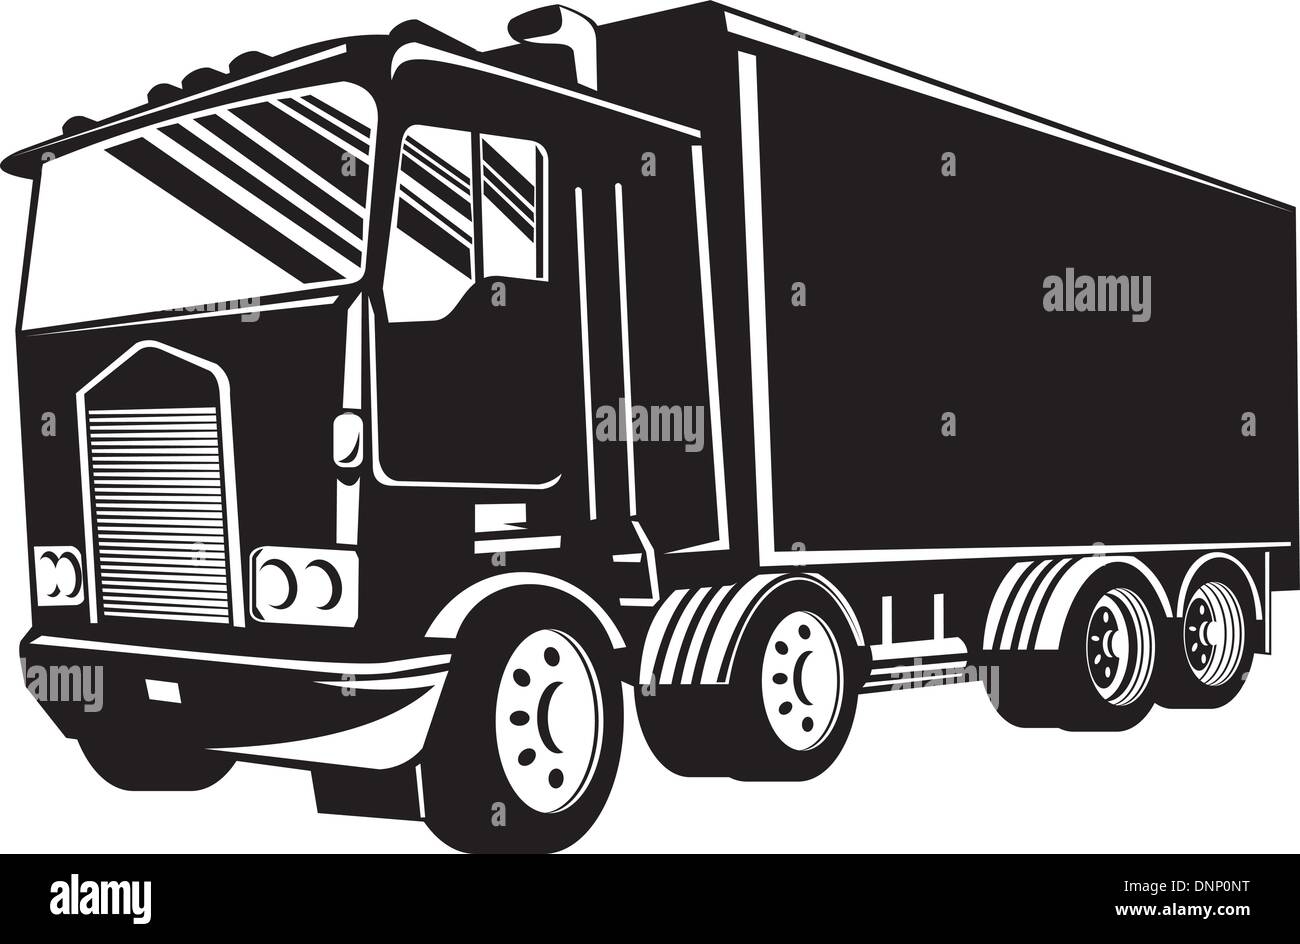 illustration of a container truck lorry done in retro style on isolated background Stock Vector